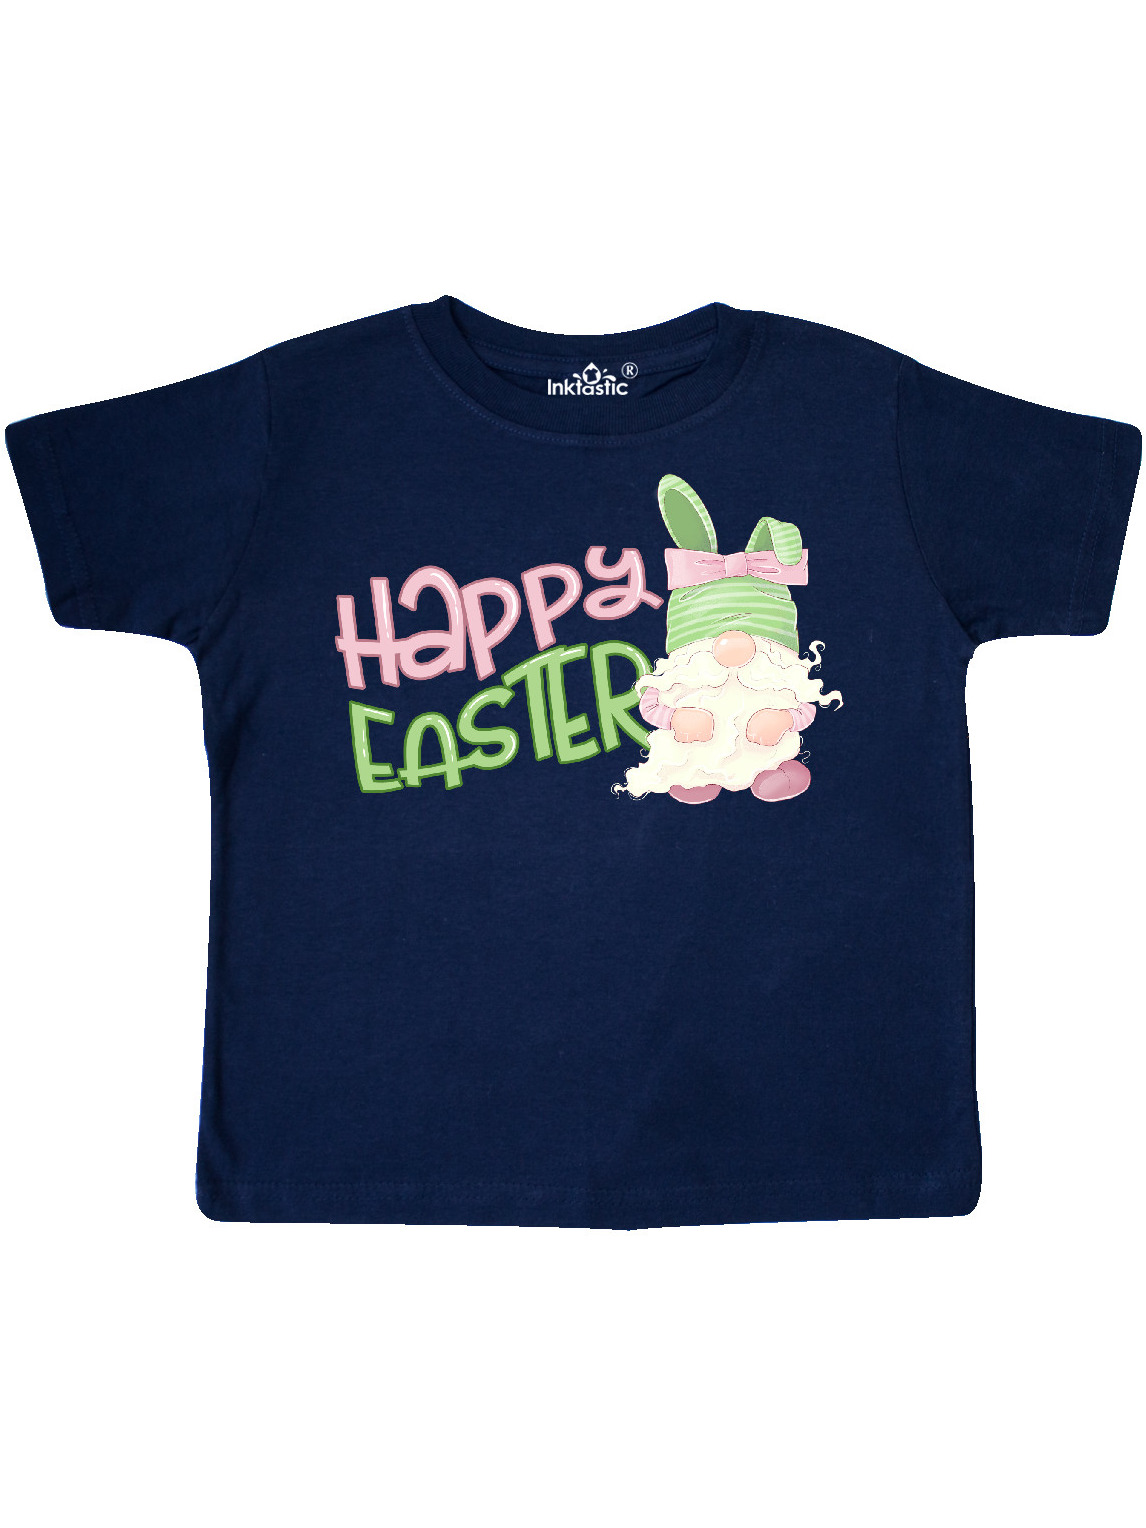 Easter Gnomes Toddler Tee